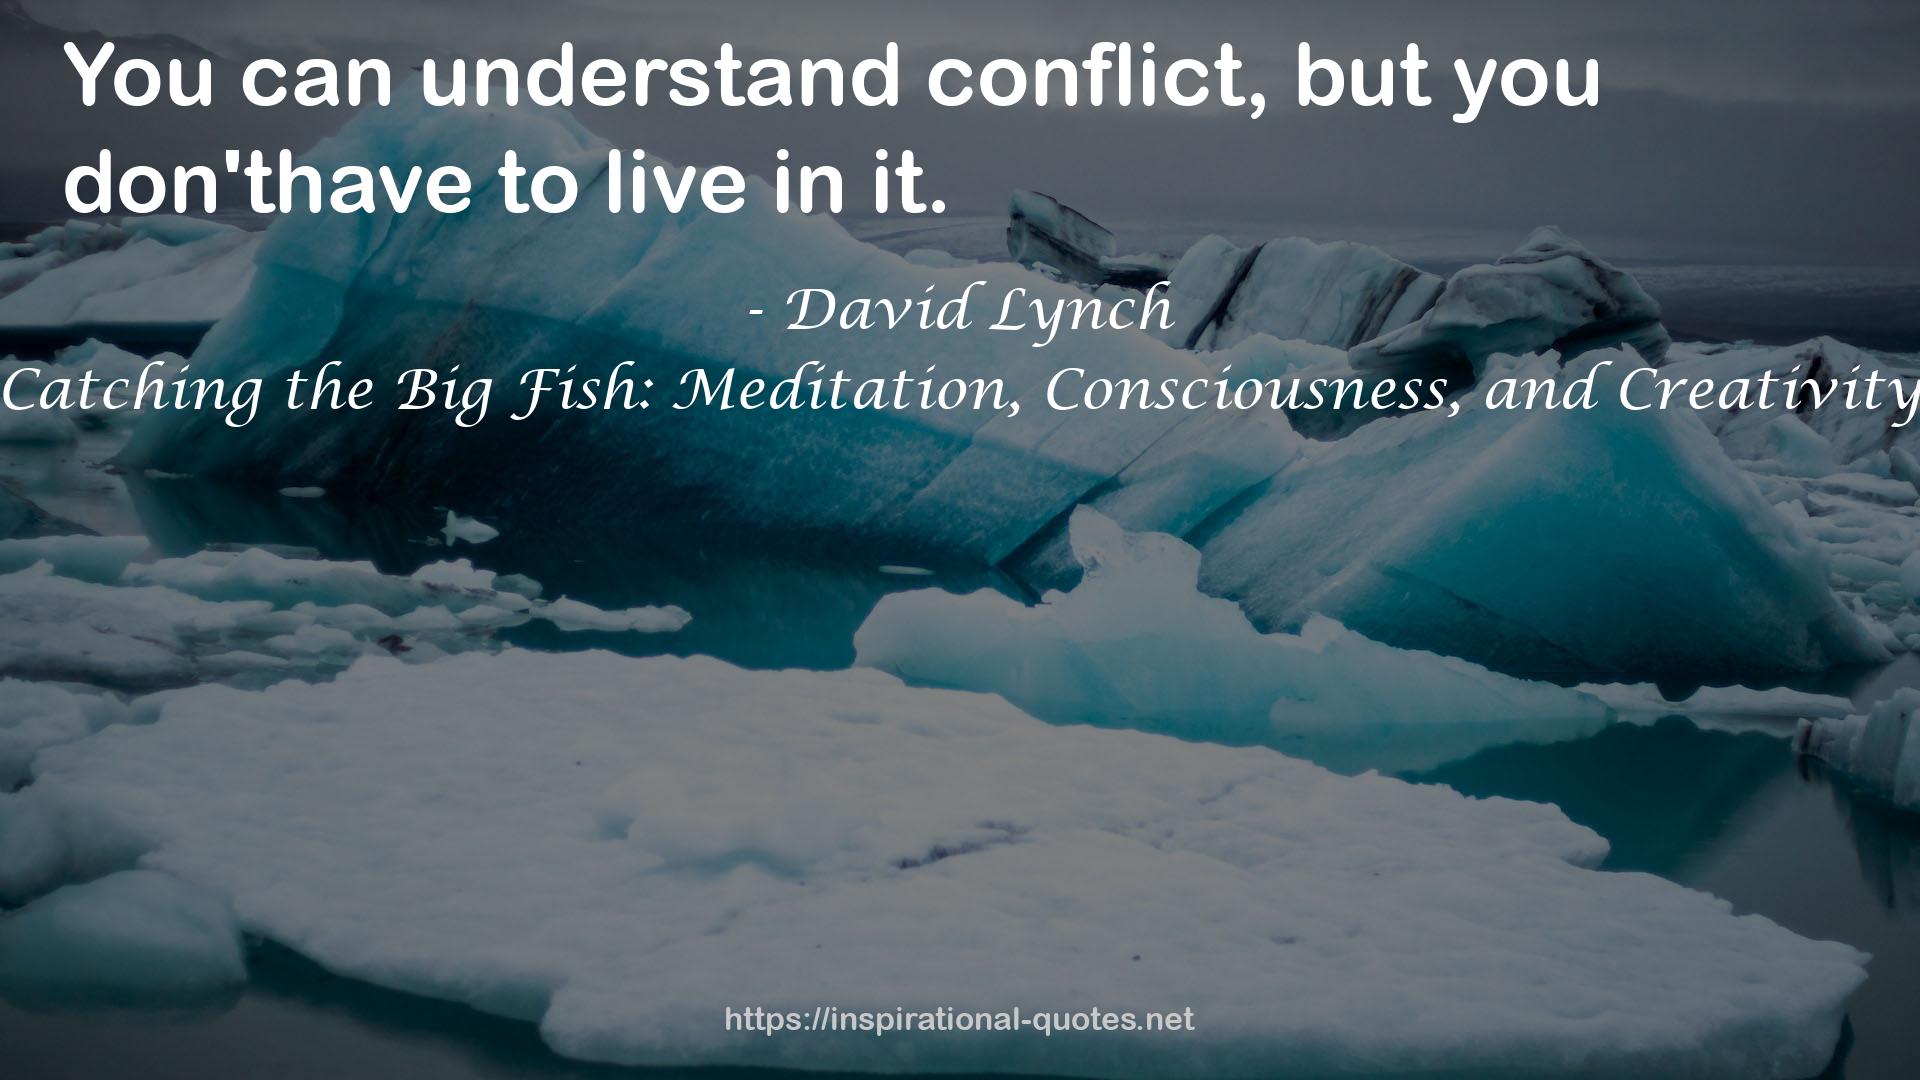 Catching the Big Fish: Meditation, Consciousness, and Creativity QUOTES